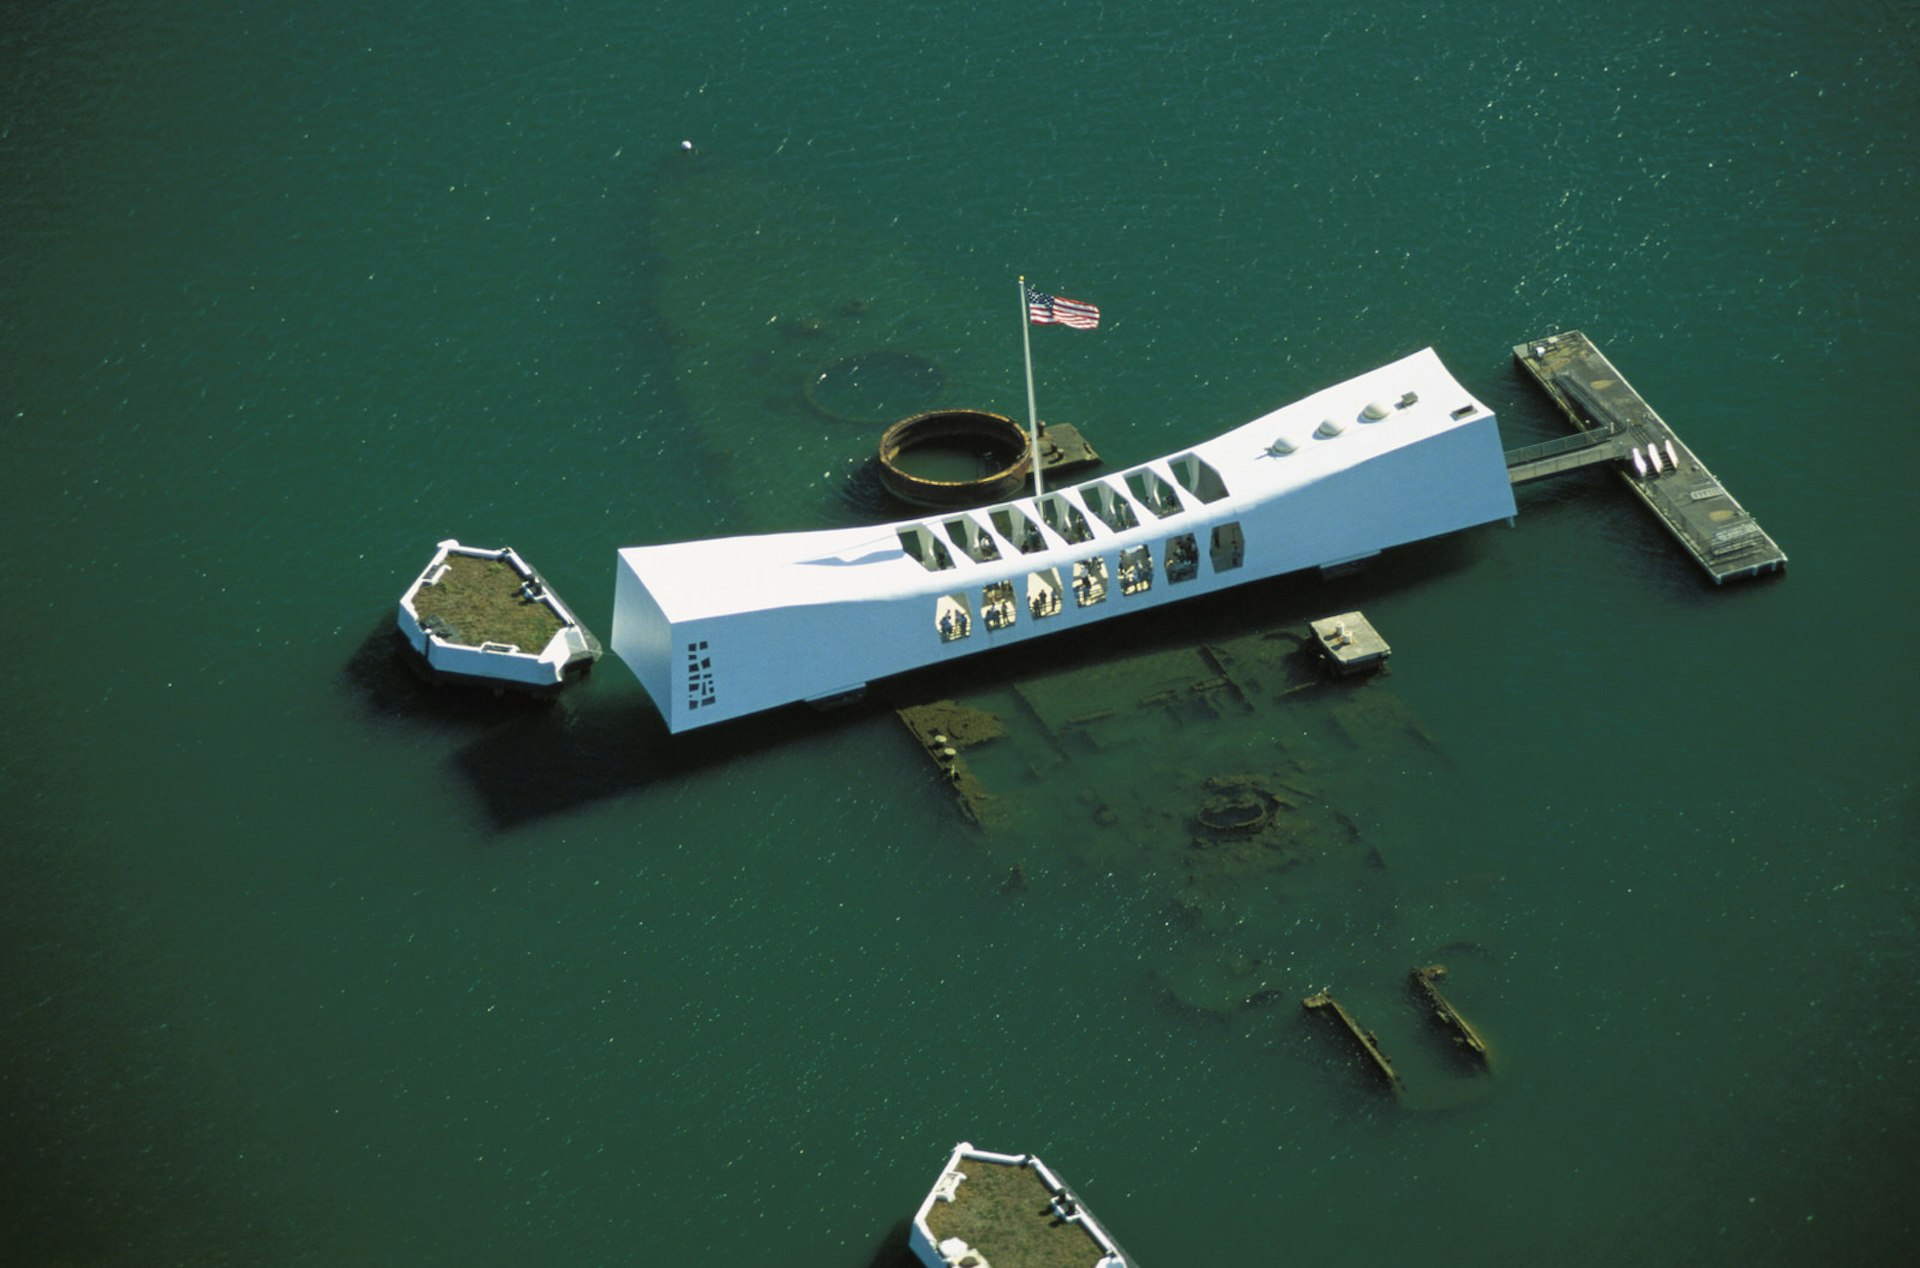 From an overhead birds-eye view, you can see the white USS Arizona memorial and, beneath the water, the remains of the shipwreck © Dana Edmunds / Getty Images